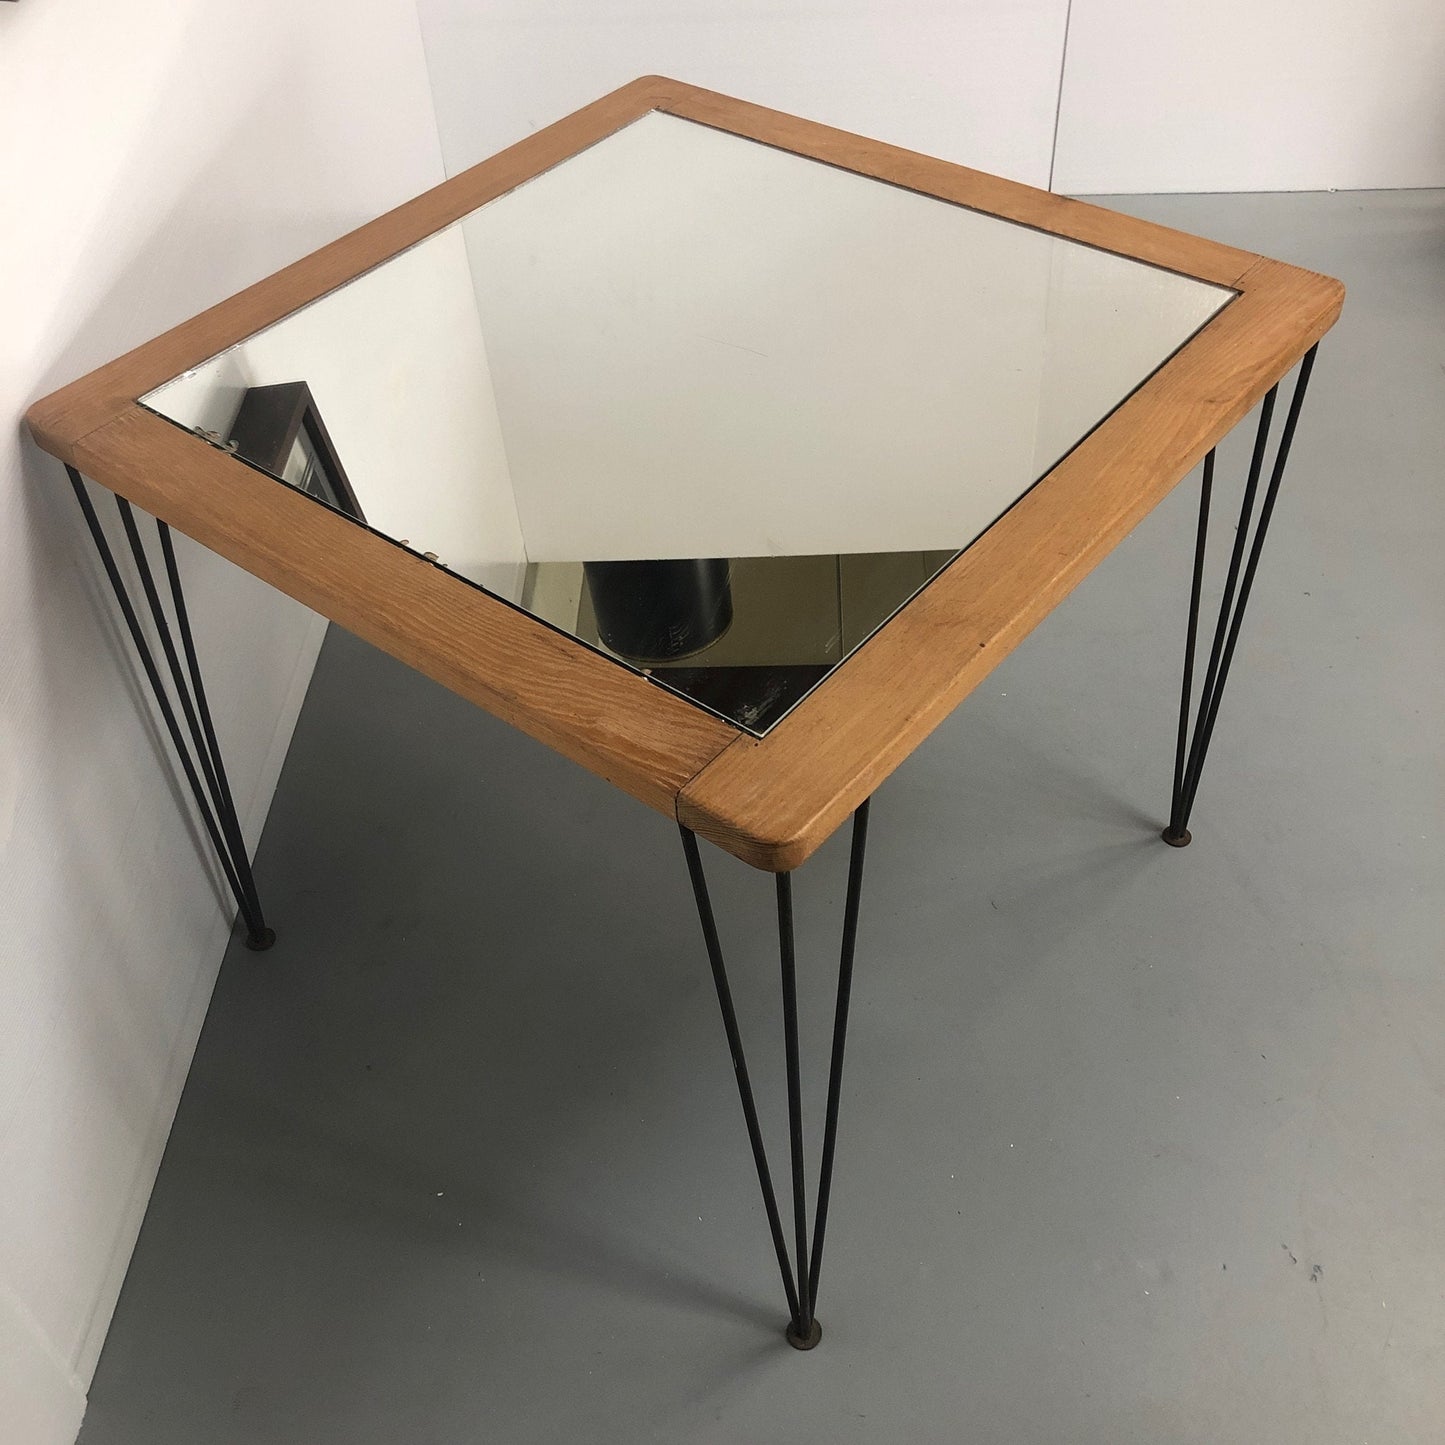 Ficks Reed Sol-Air Mirror Top Square Table